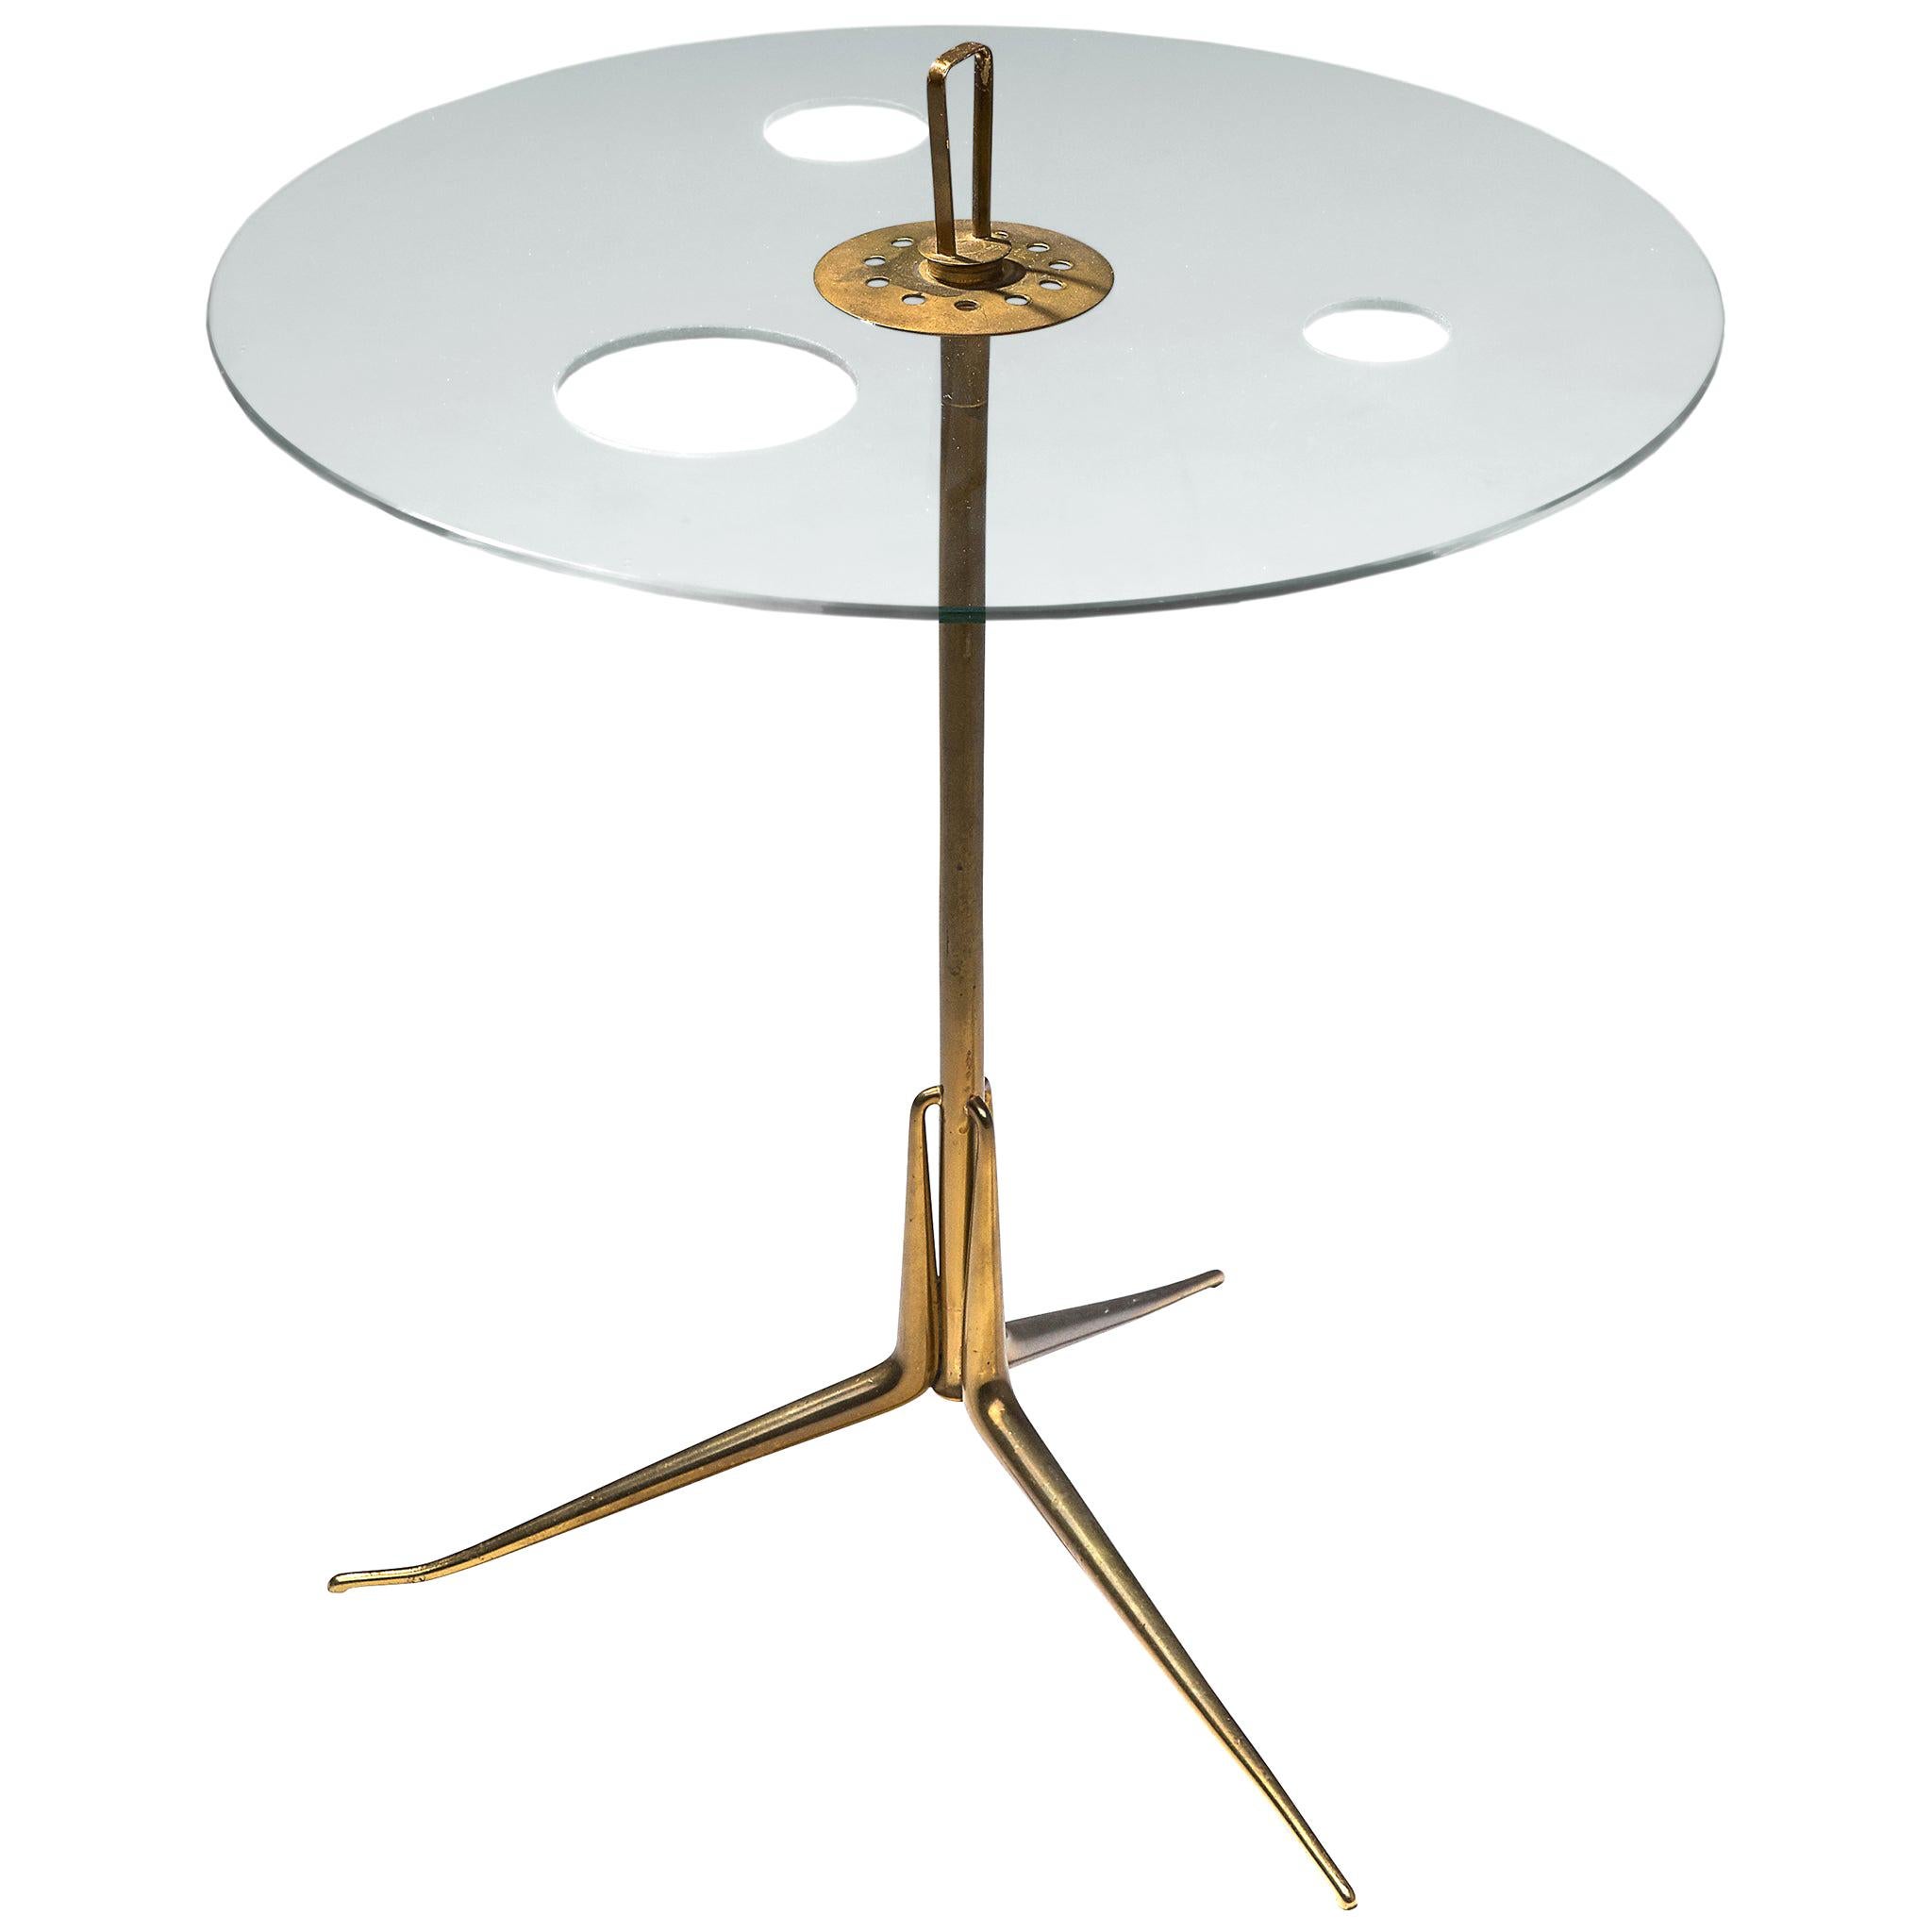 Arteluce Serving Stand in Brass and Glass